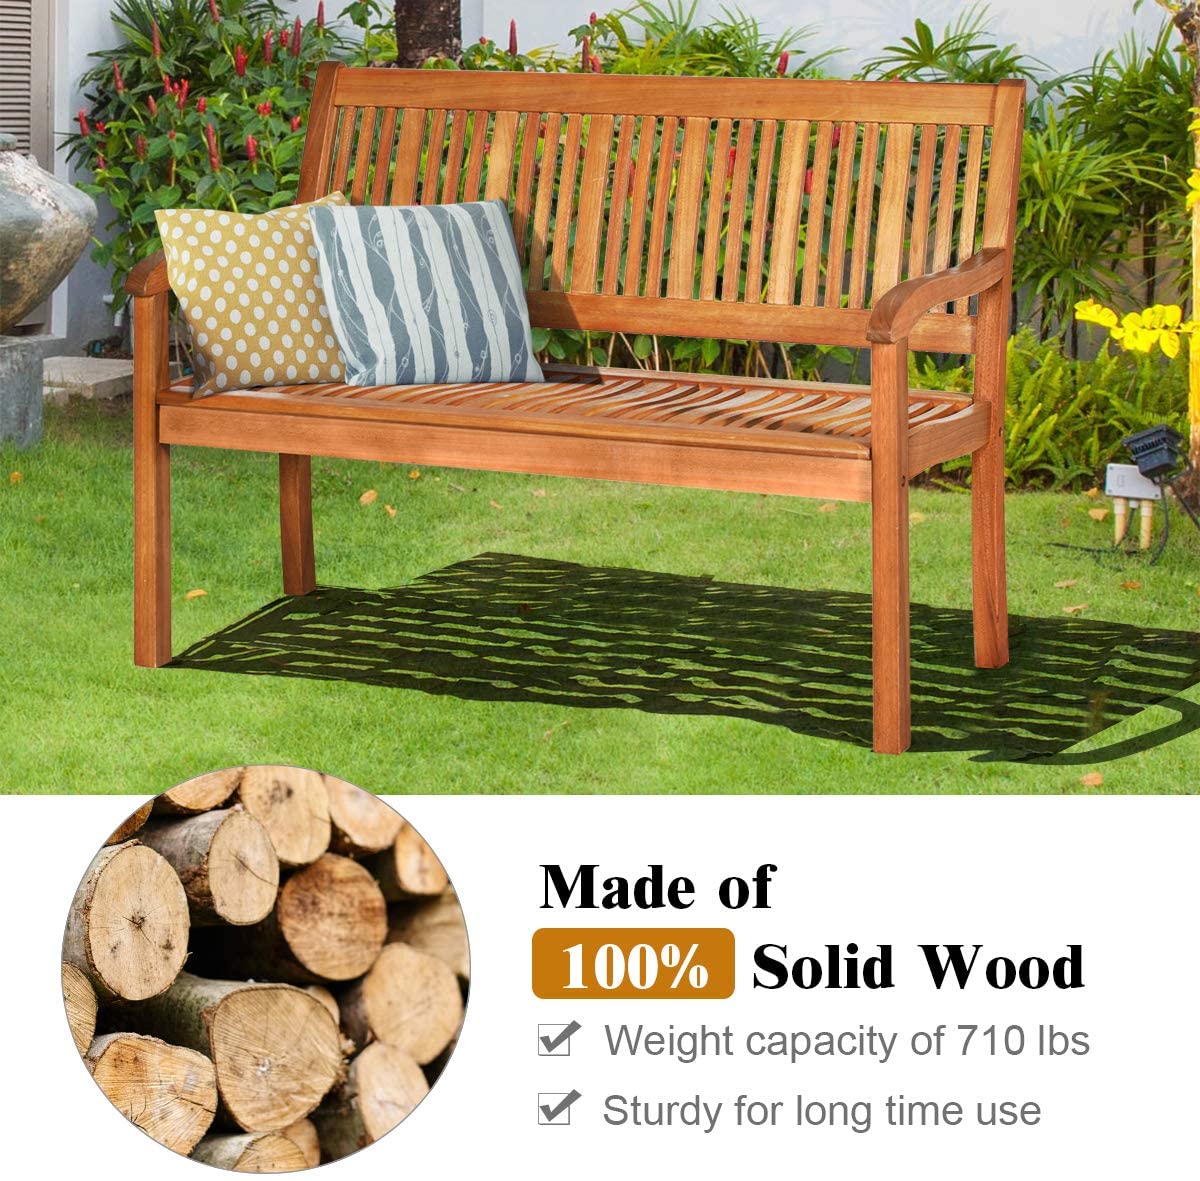 Outdoor Patio Two Person Solid Wood Garden Bench with Backrest and Armrest, 50" L x 25" W x 36" H